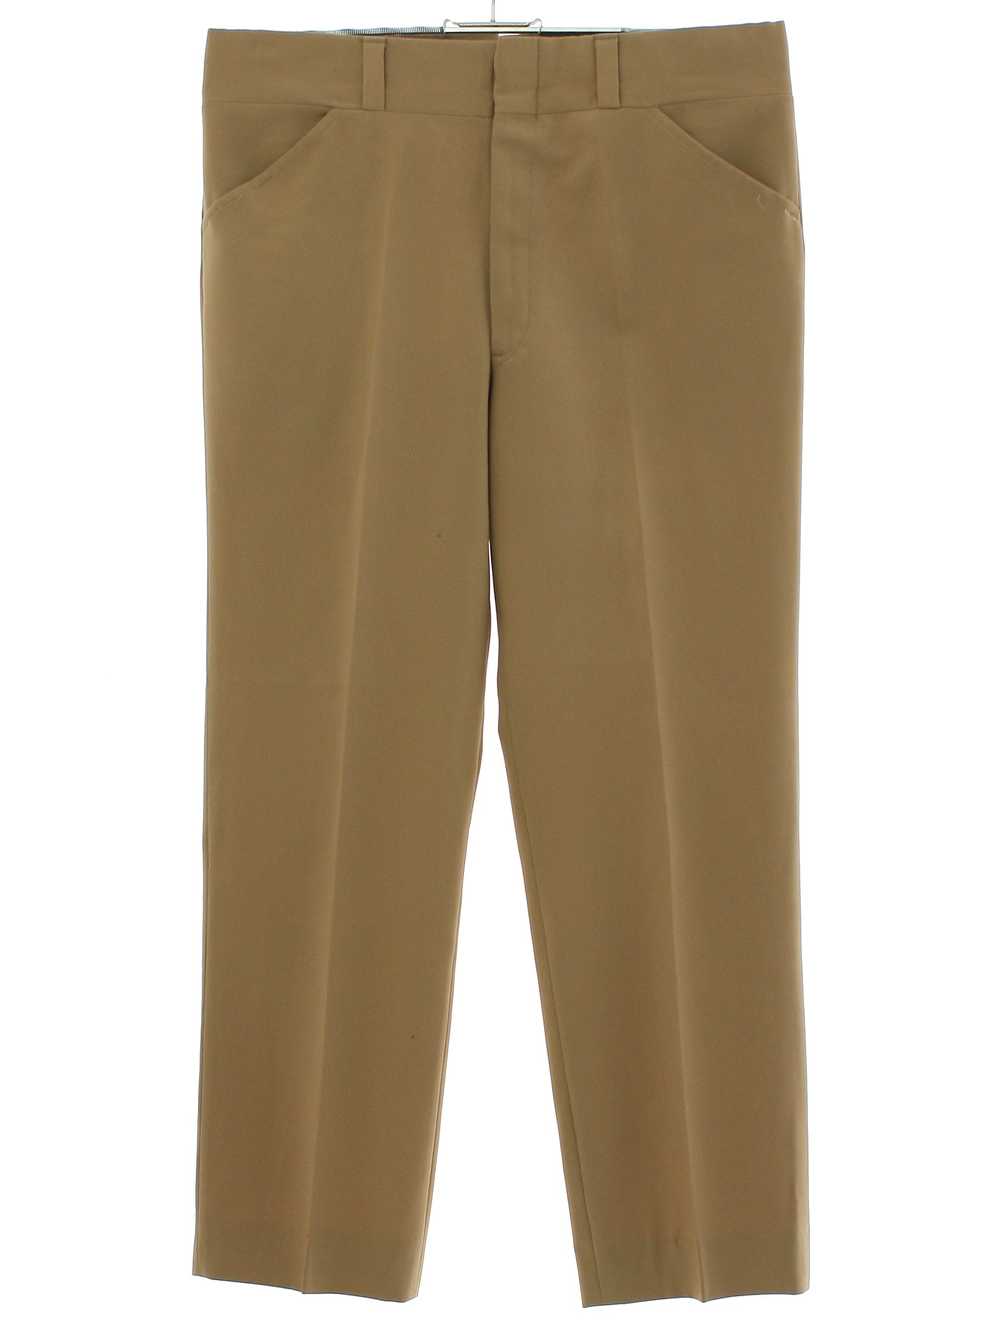 1970's Asher Mens Leisure Style Disco Pants - image 1